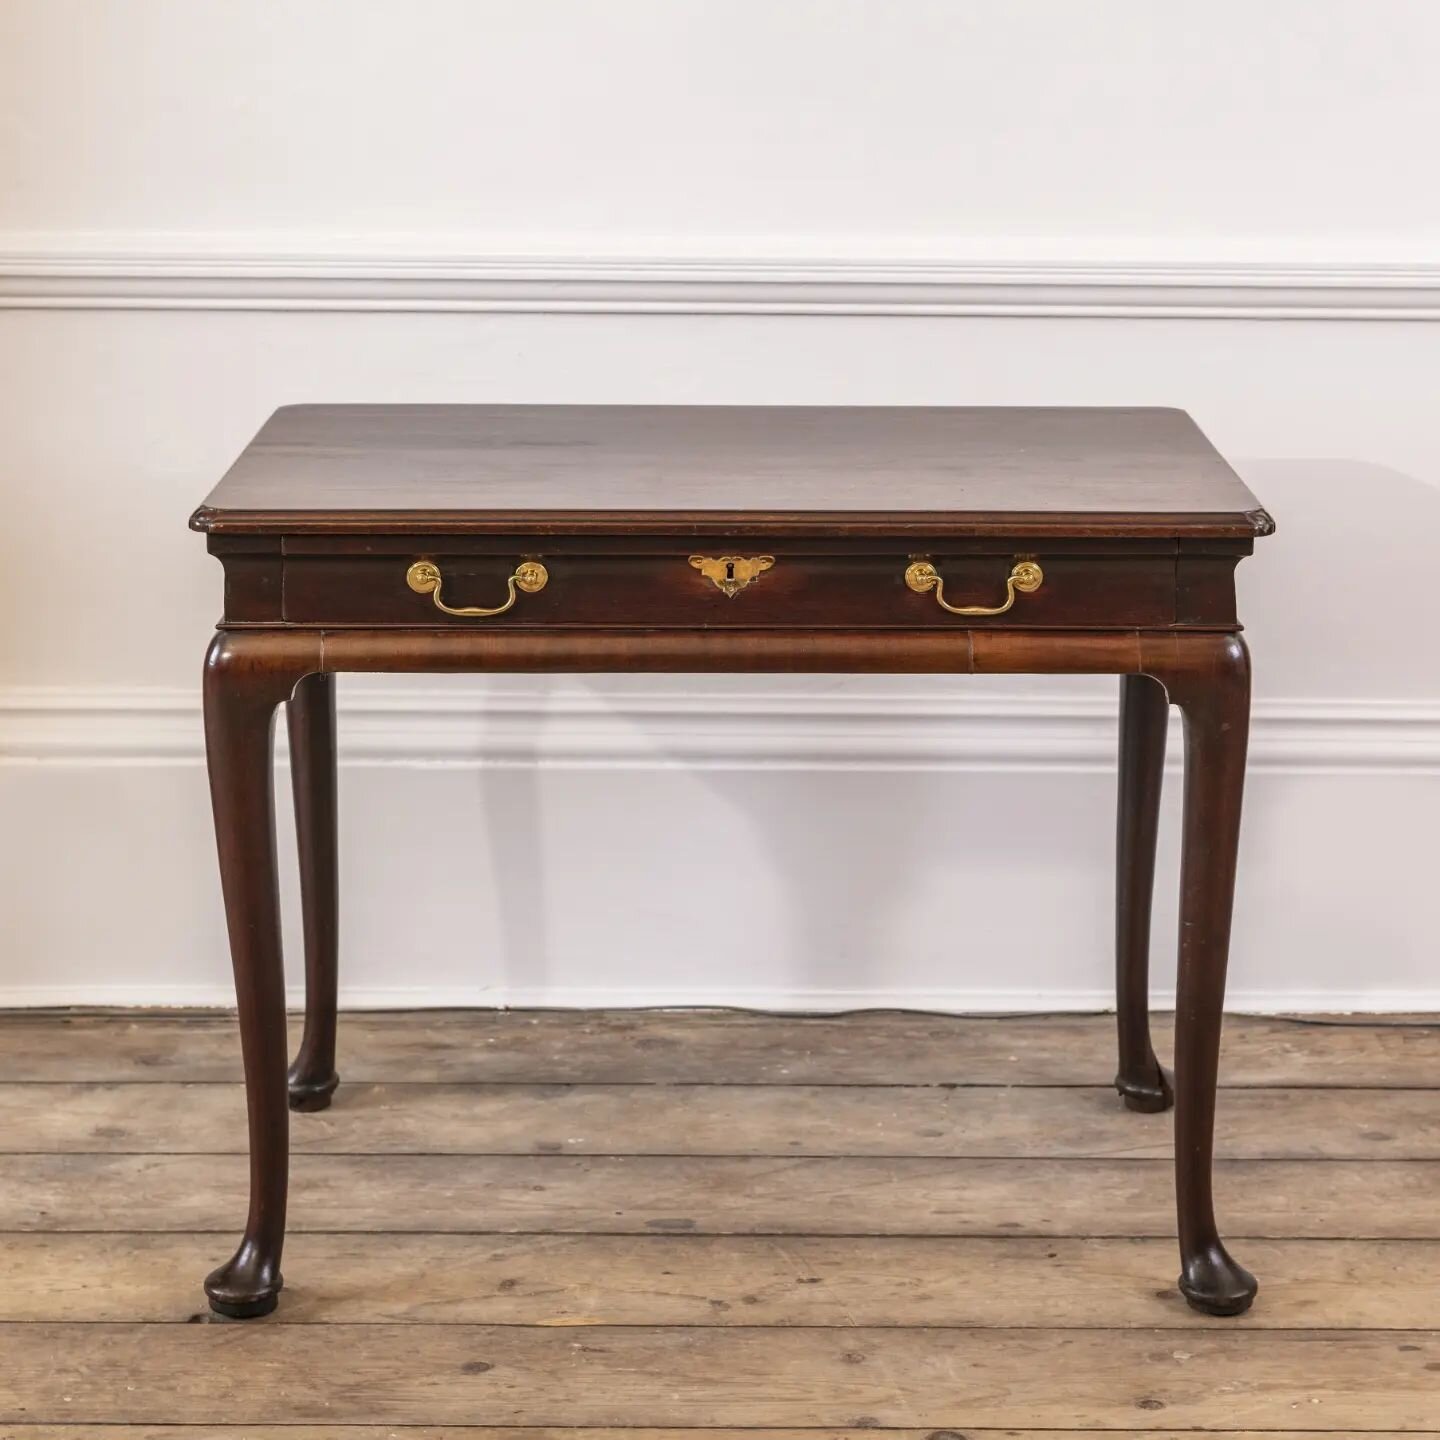 .
A George II mahogany side table with original handles and lovely colour.

English: Circa 1750

&pound;4450

#antiquetable 
#antique 
#englishantiquetable 
#georgian 
#georgianinteriors
#interiorstyle 
#englishinteriors